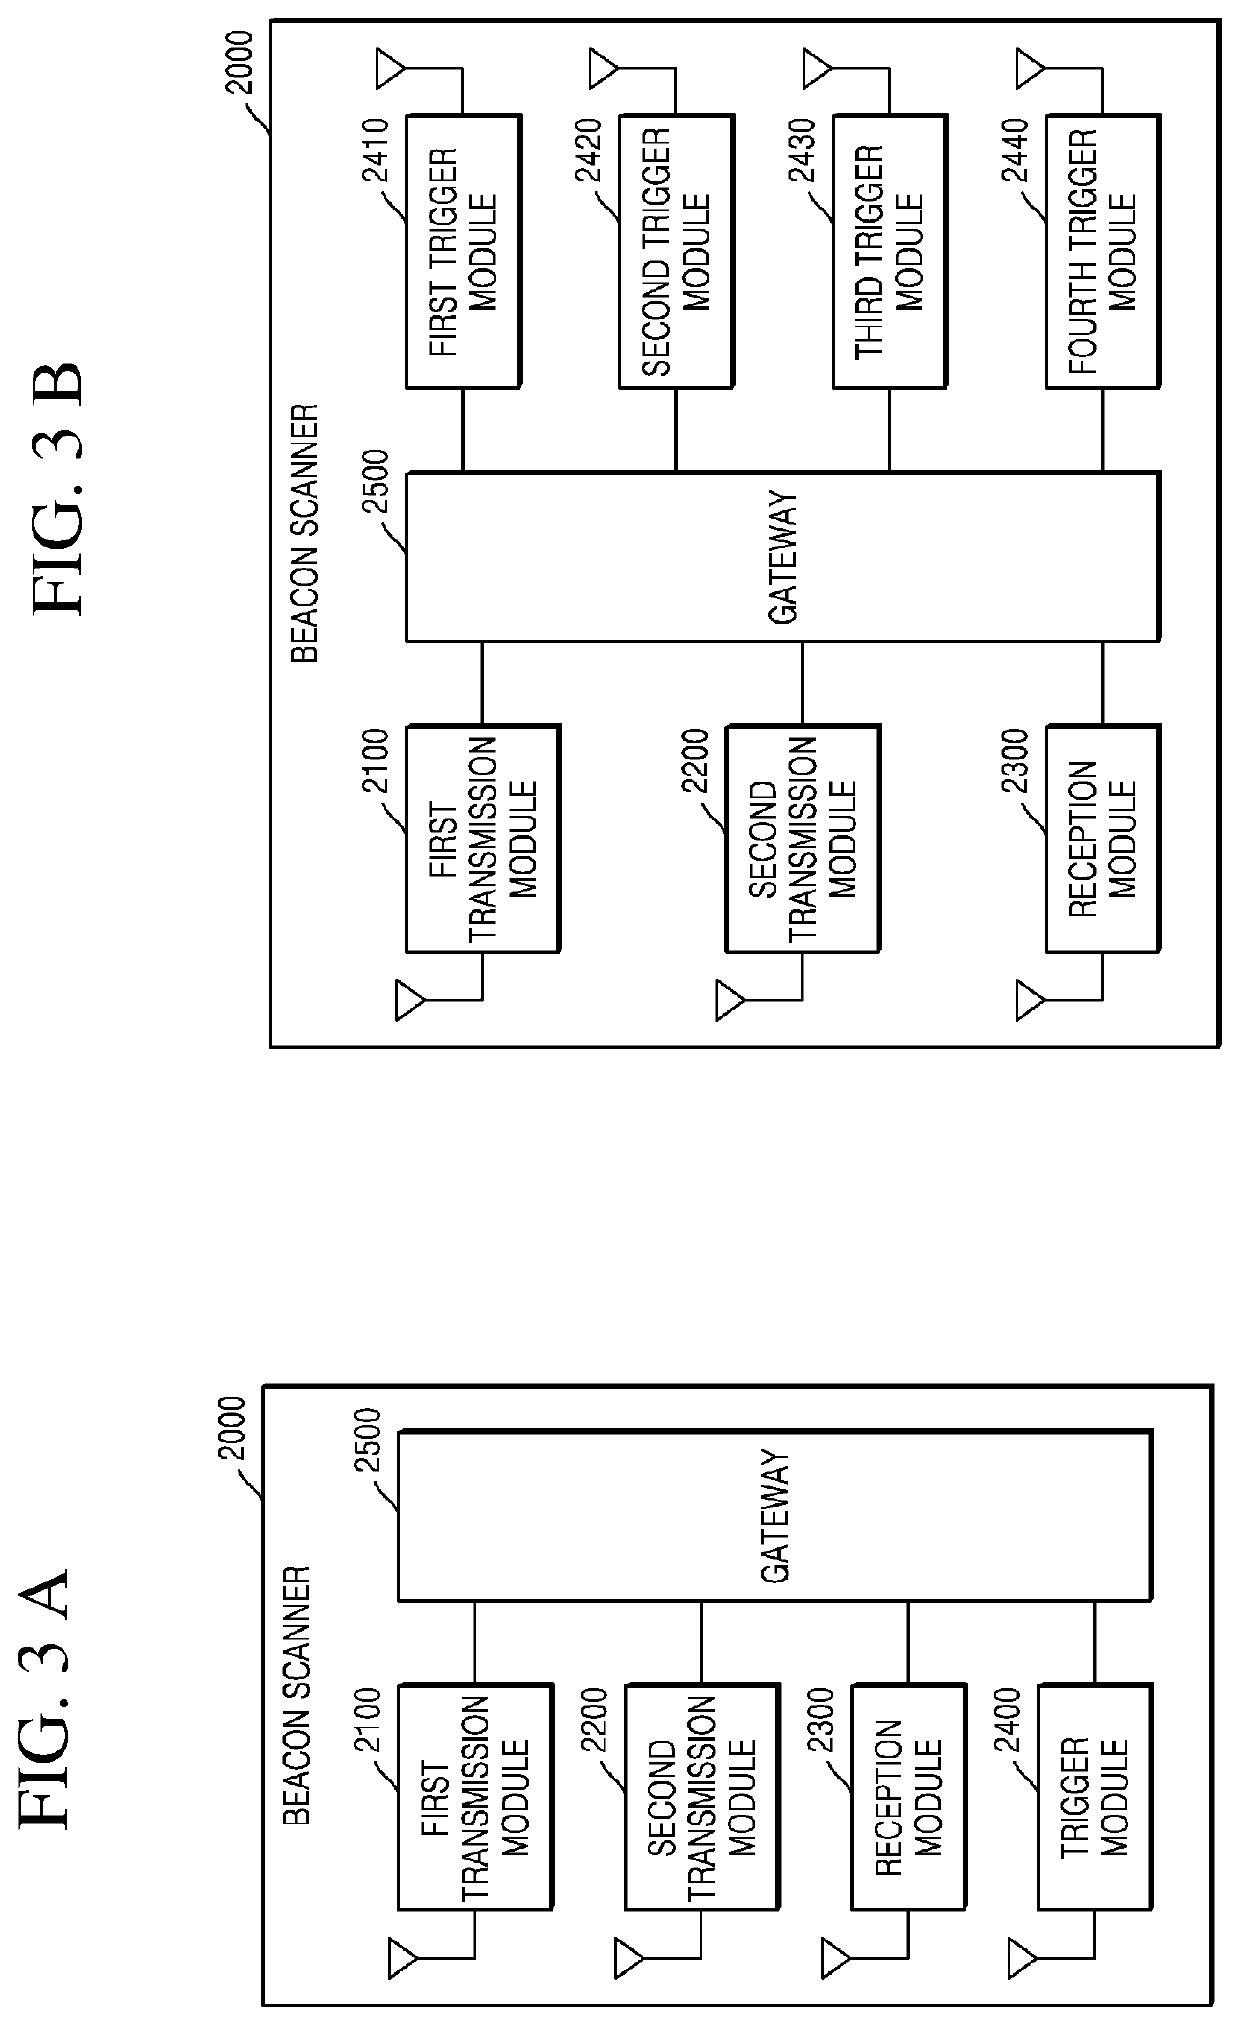 System, method and computer-readable medium for determining location of moving tag based on radio signal